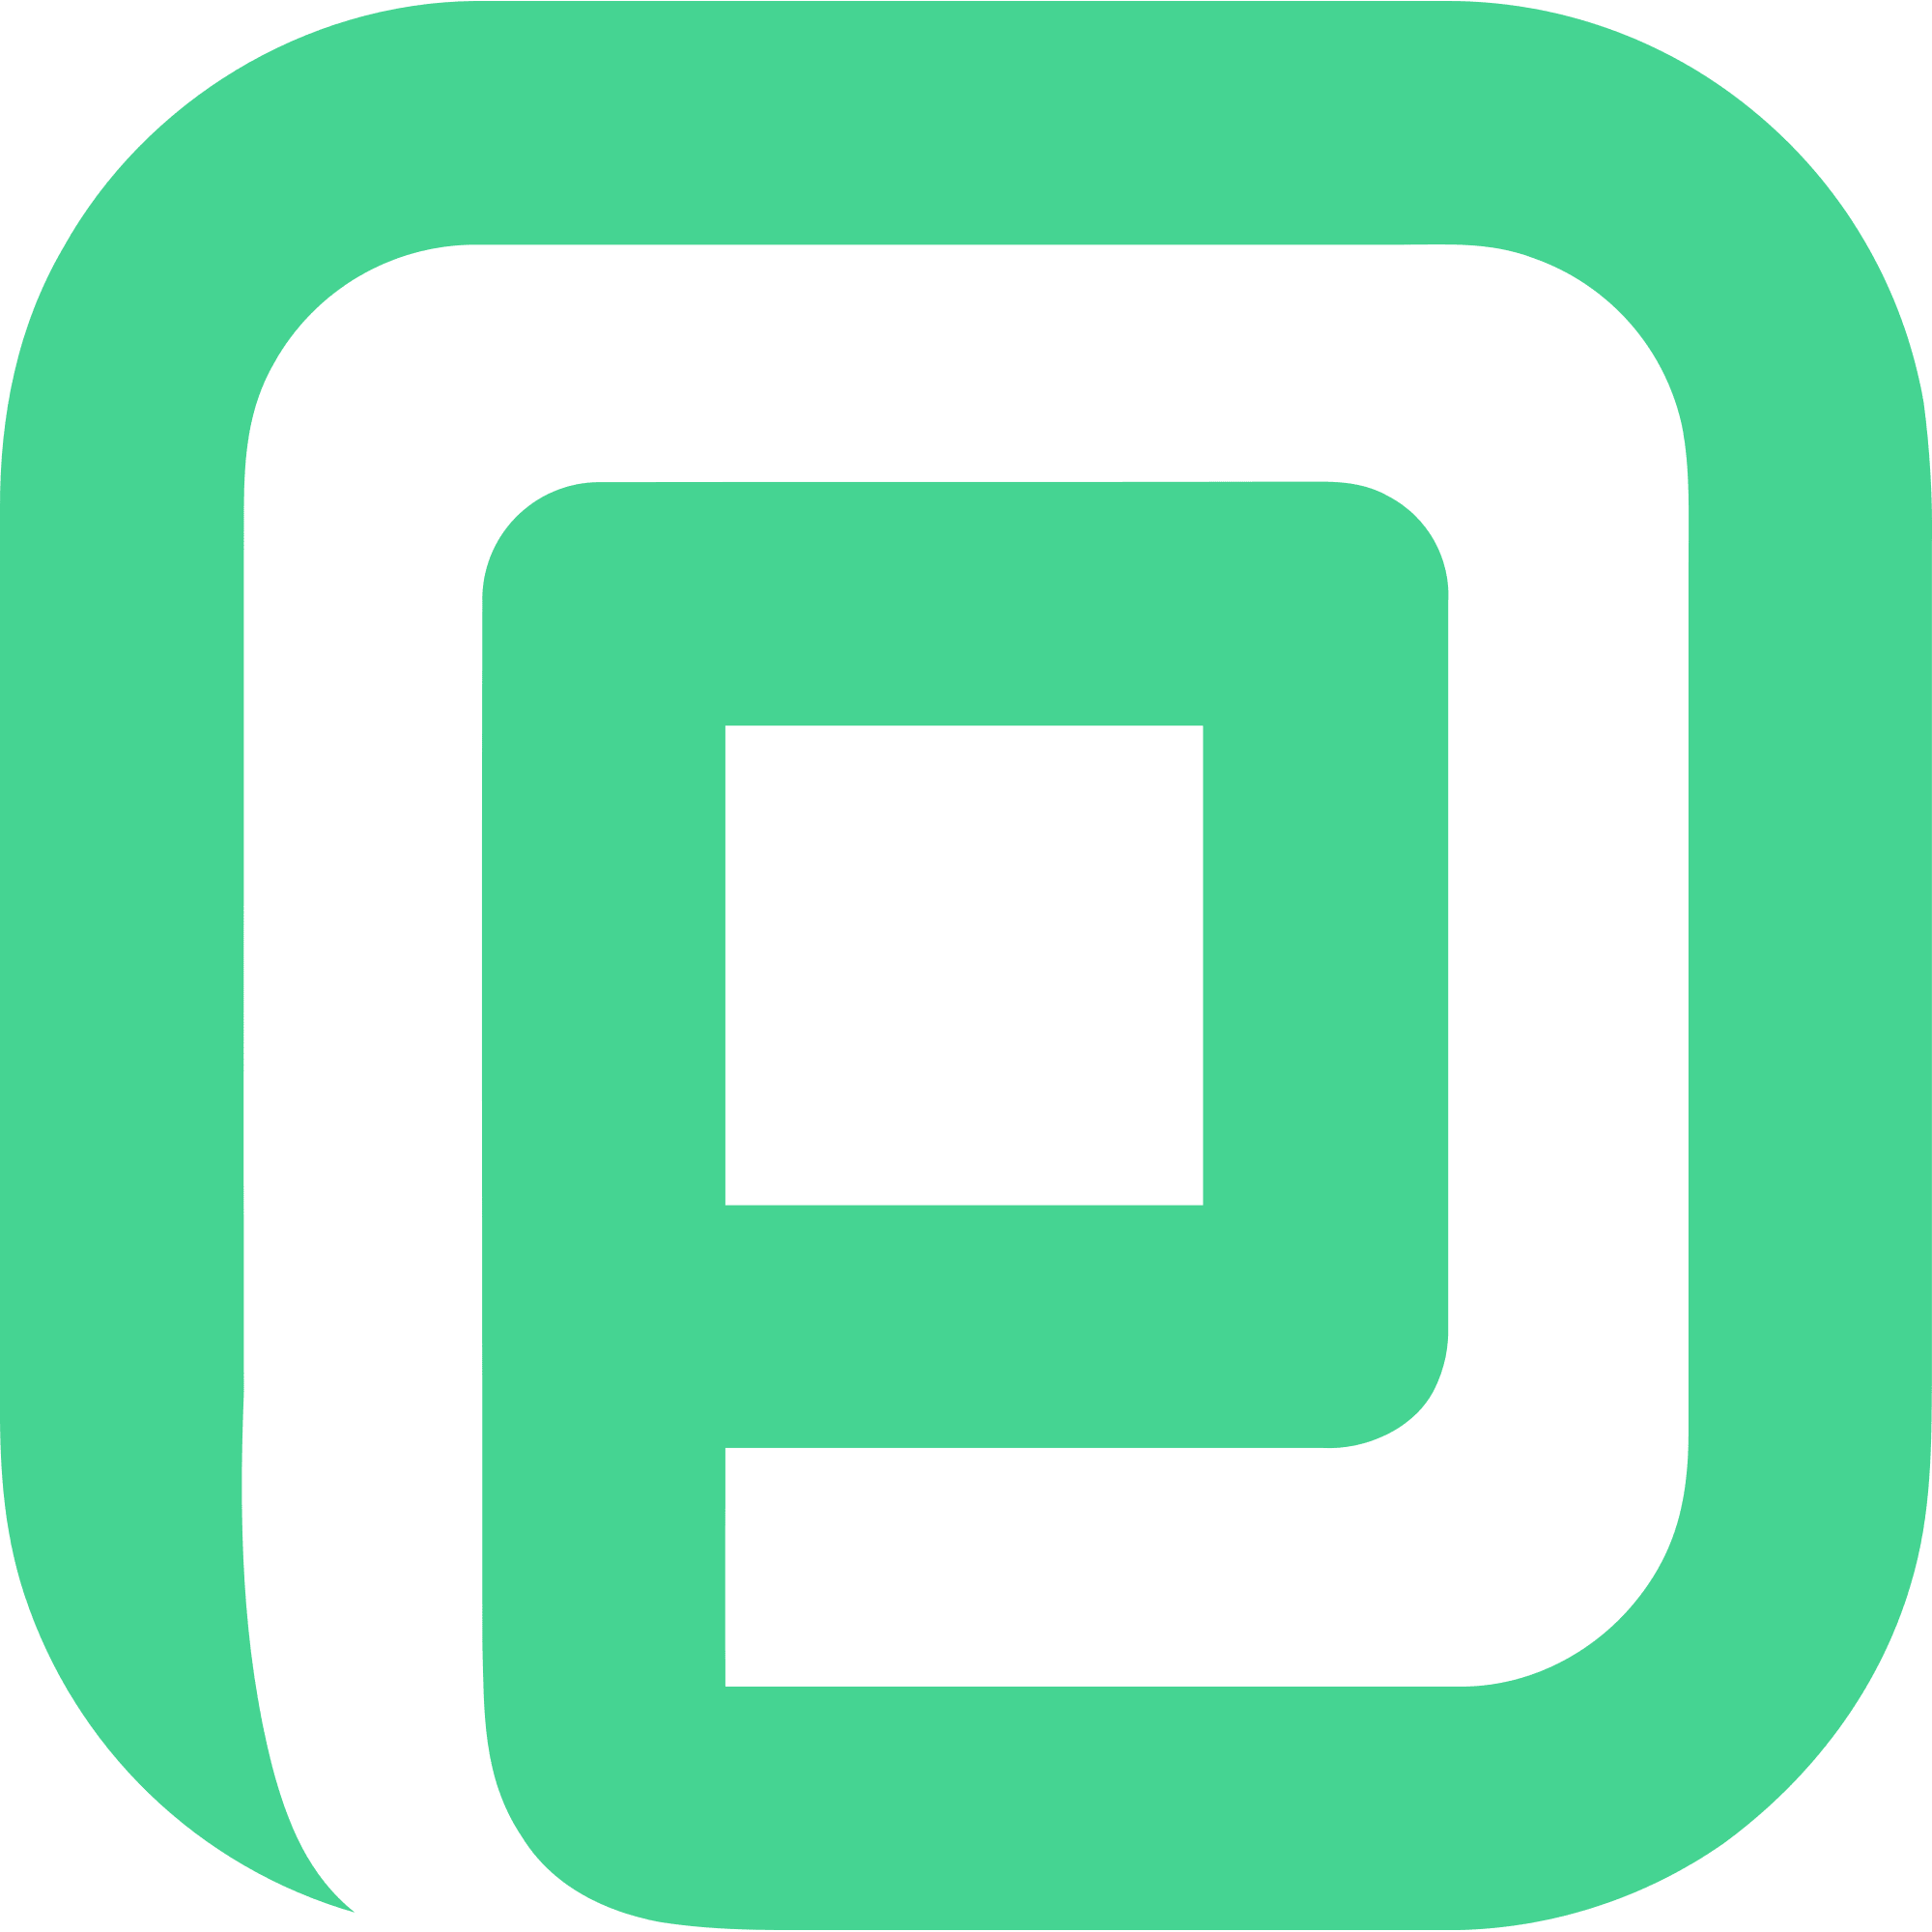 Particl logo in png format